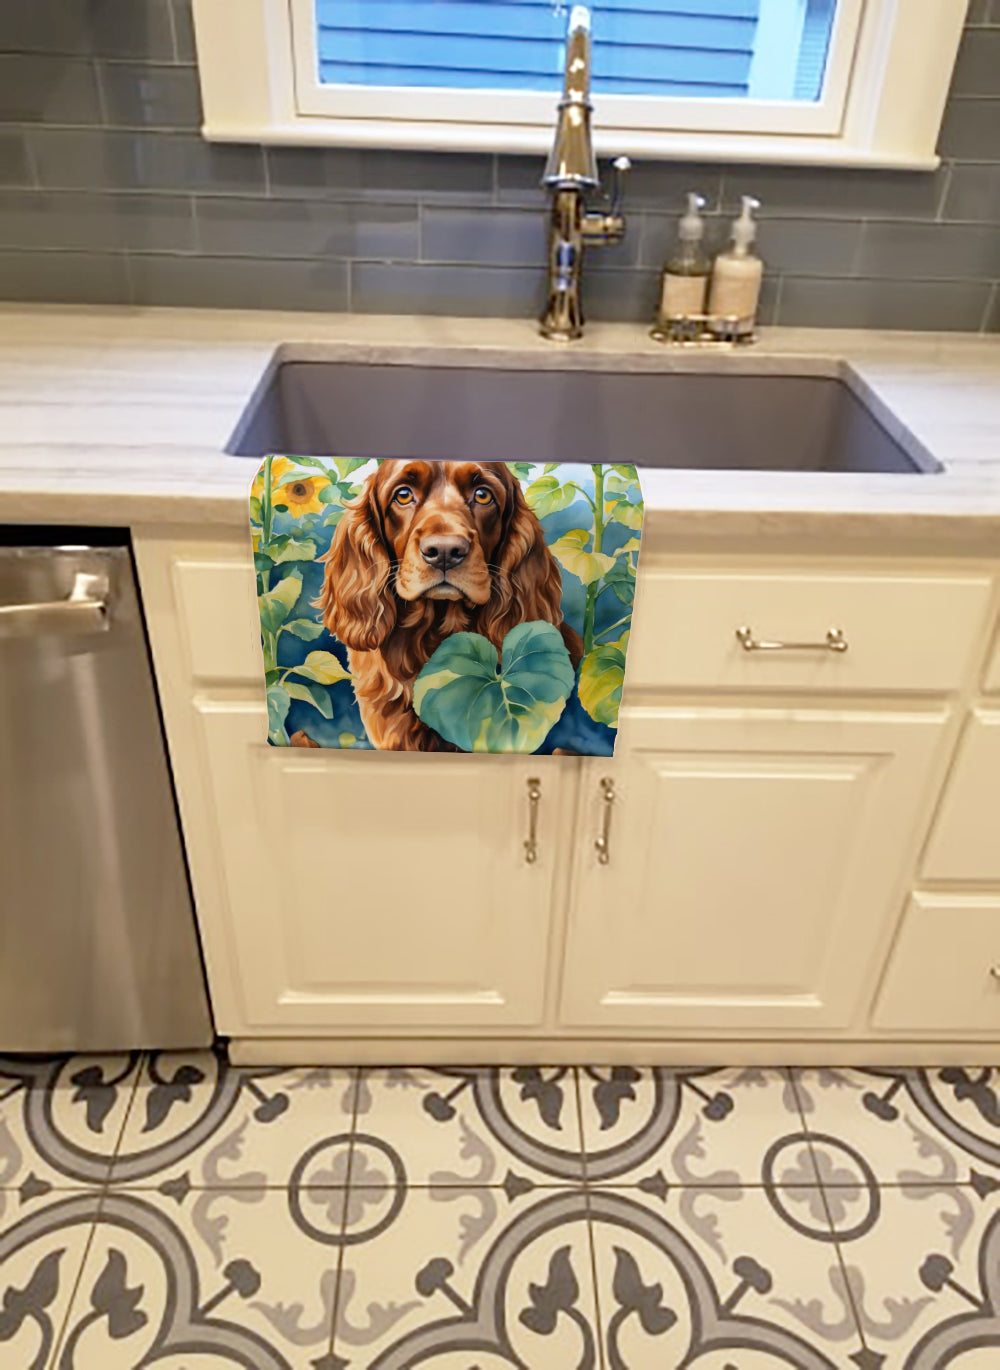 Buy this English Cocker Spaniel in Sunflowers Kitchen Towel